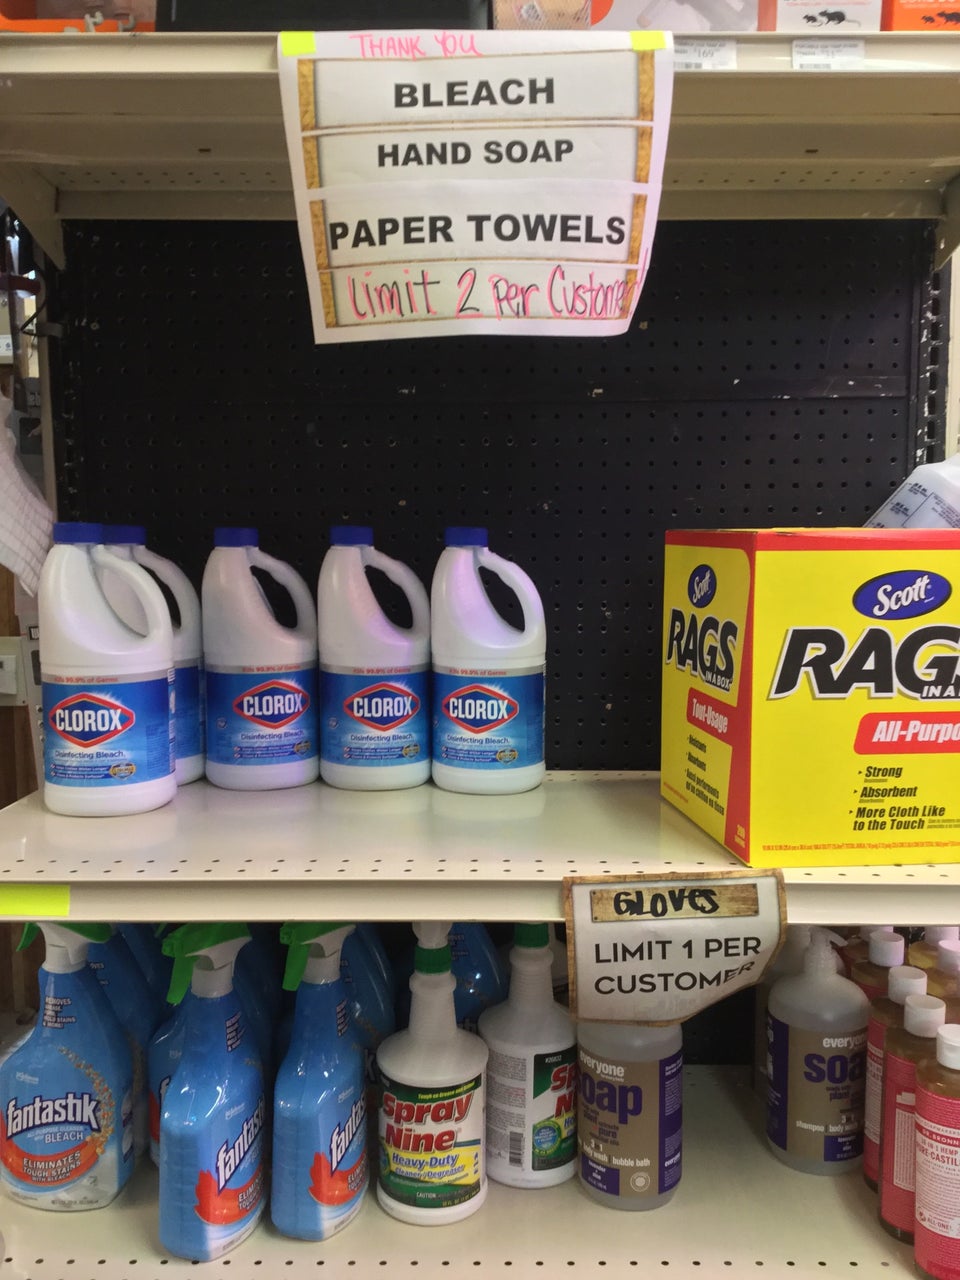 Shelves with Clorox bleach, Scott rags, under a sign stating limit 2 per customer, gloves limit 1 per customer, other cleaning supplies below.